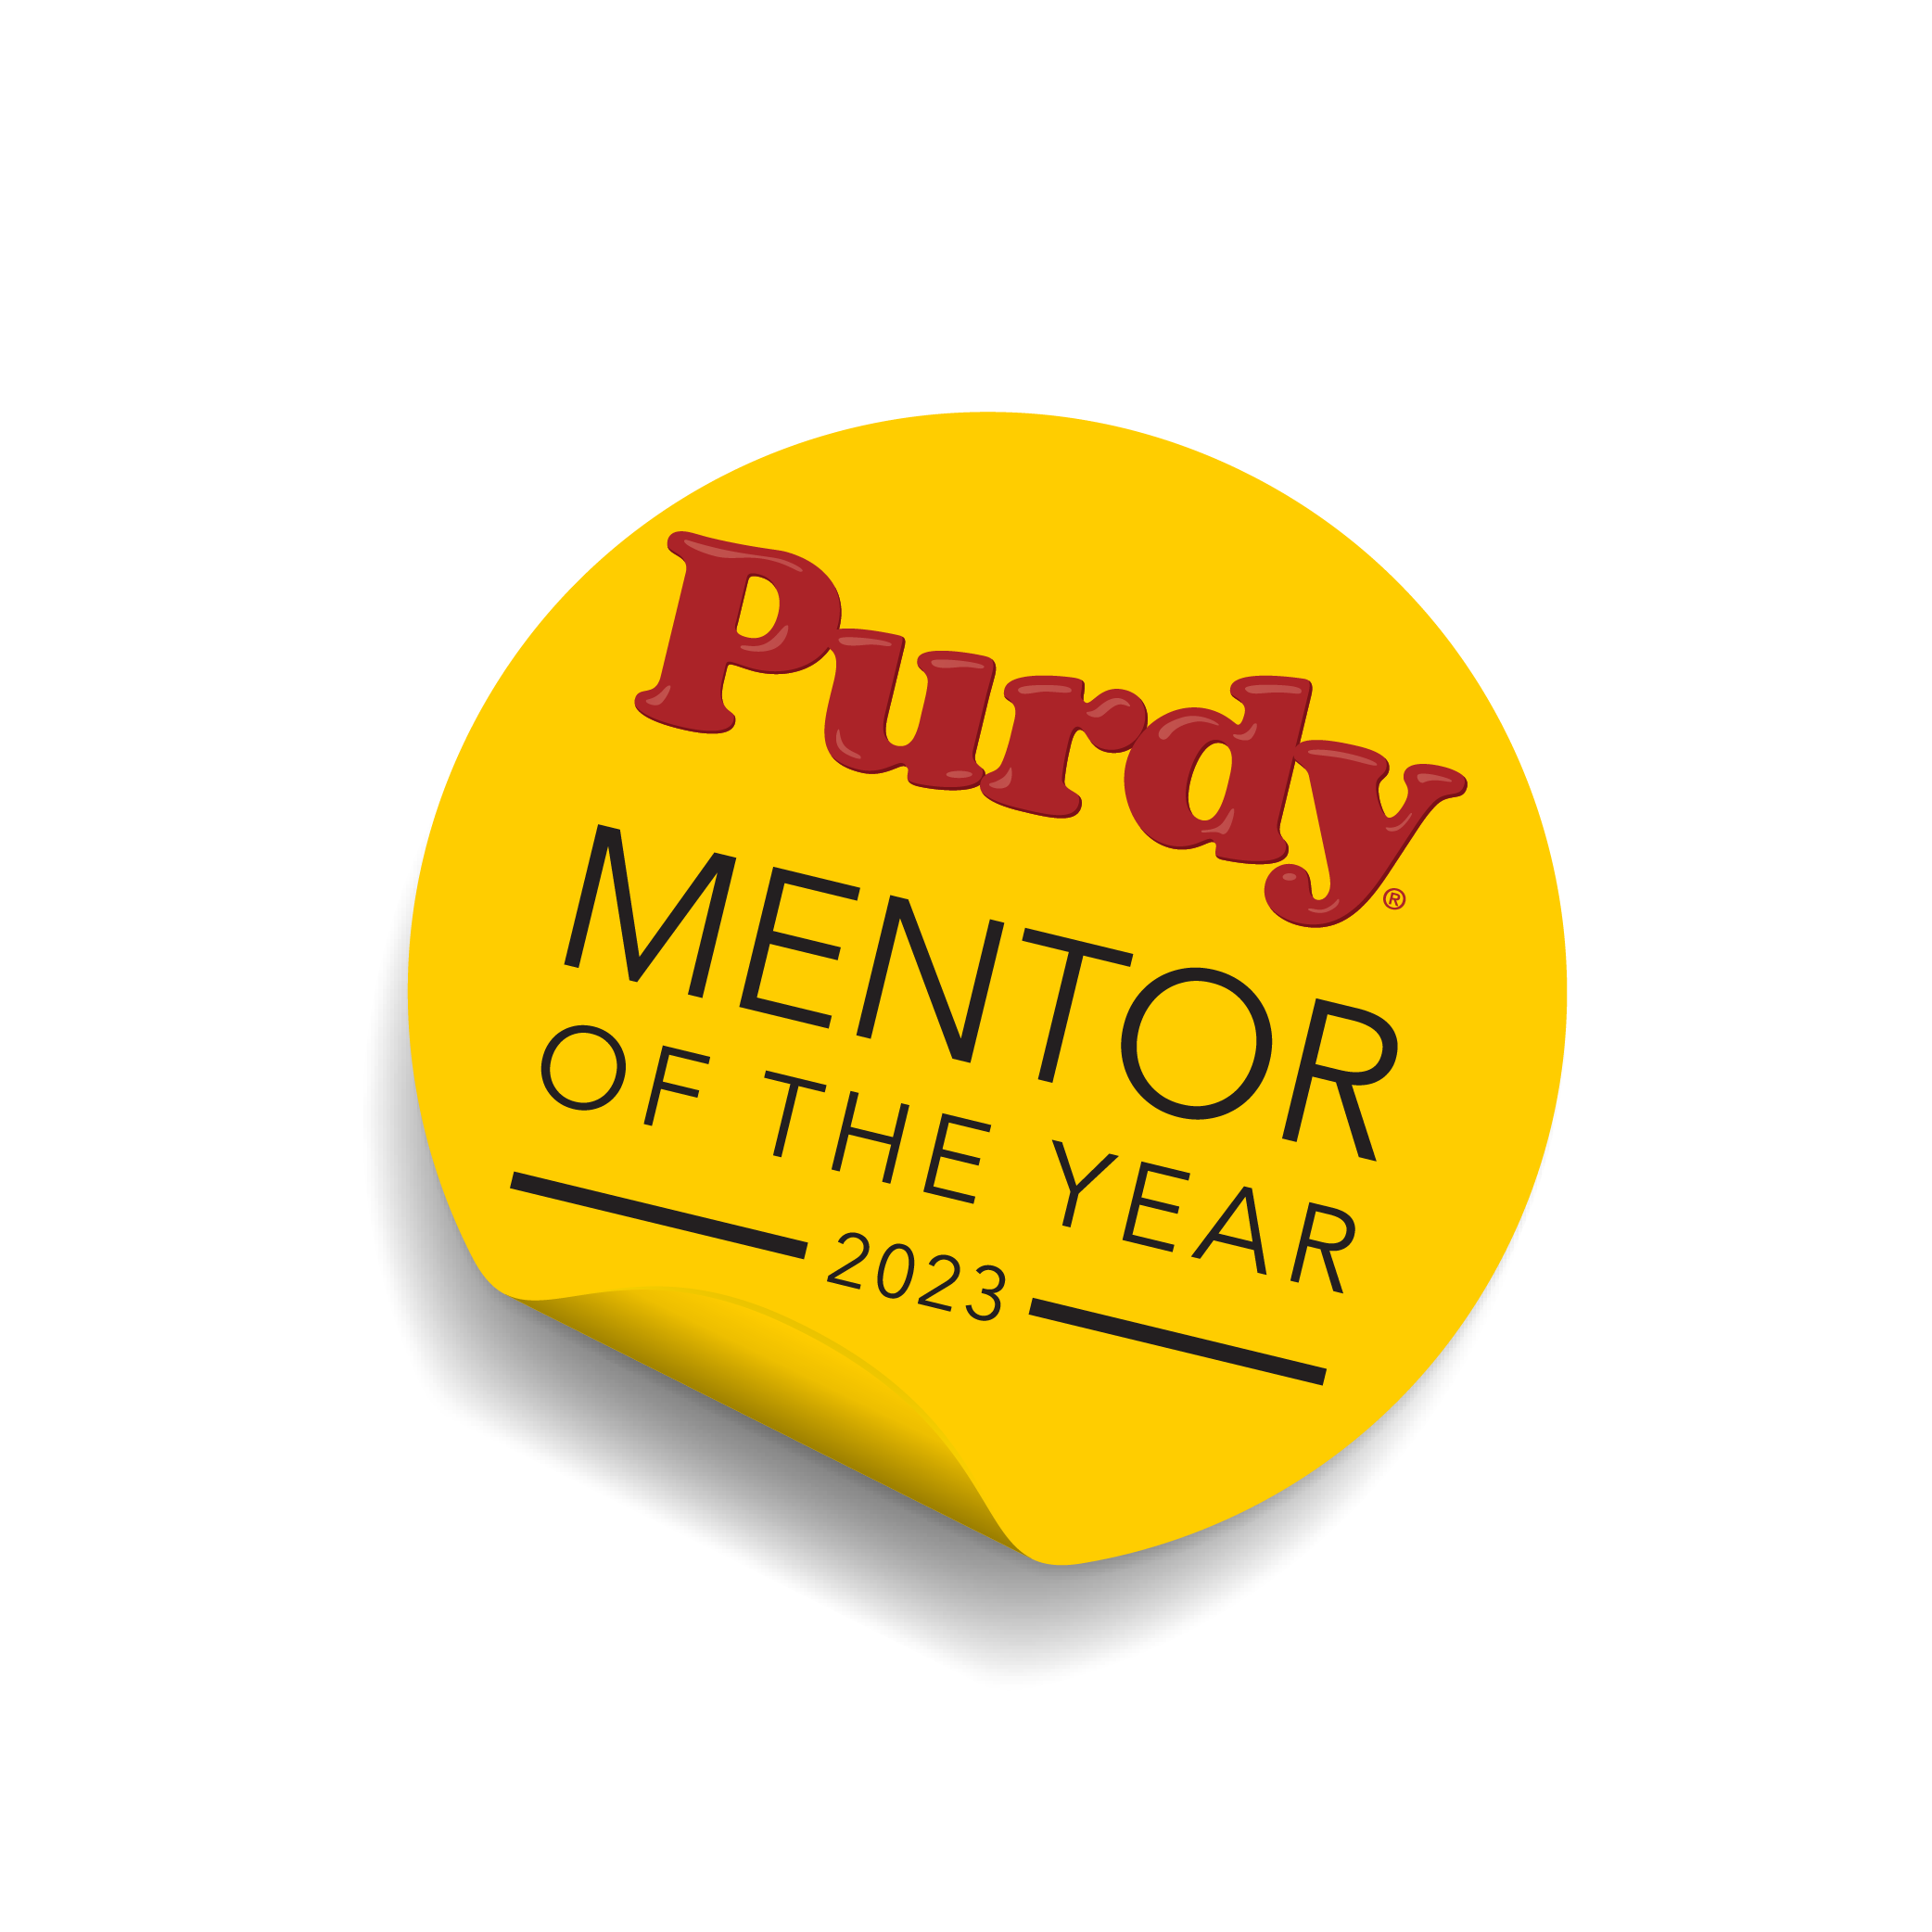 Purdy Mentor of the Year 2023 logo.png